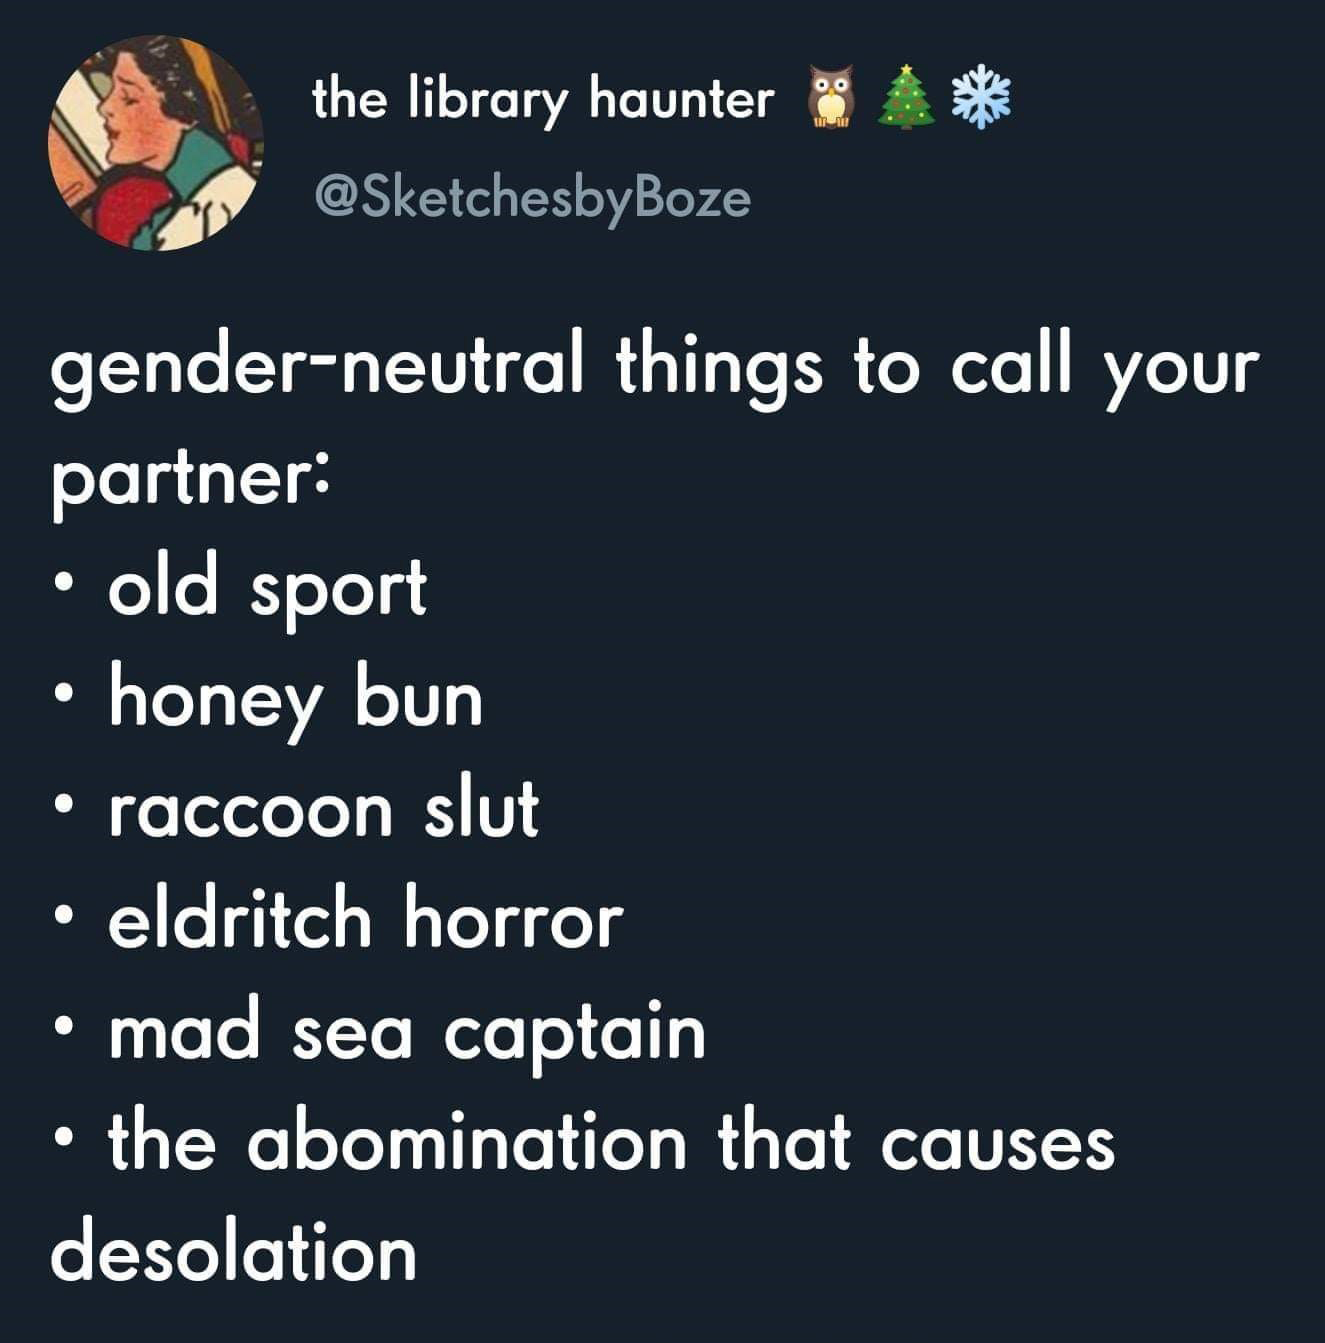 point - ur 10 the library haunter genderneutral things to call your partner old sport honey bun raccoon slut eldritch horror mad sea captain the abomination that causes desolation